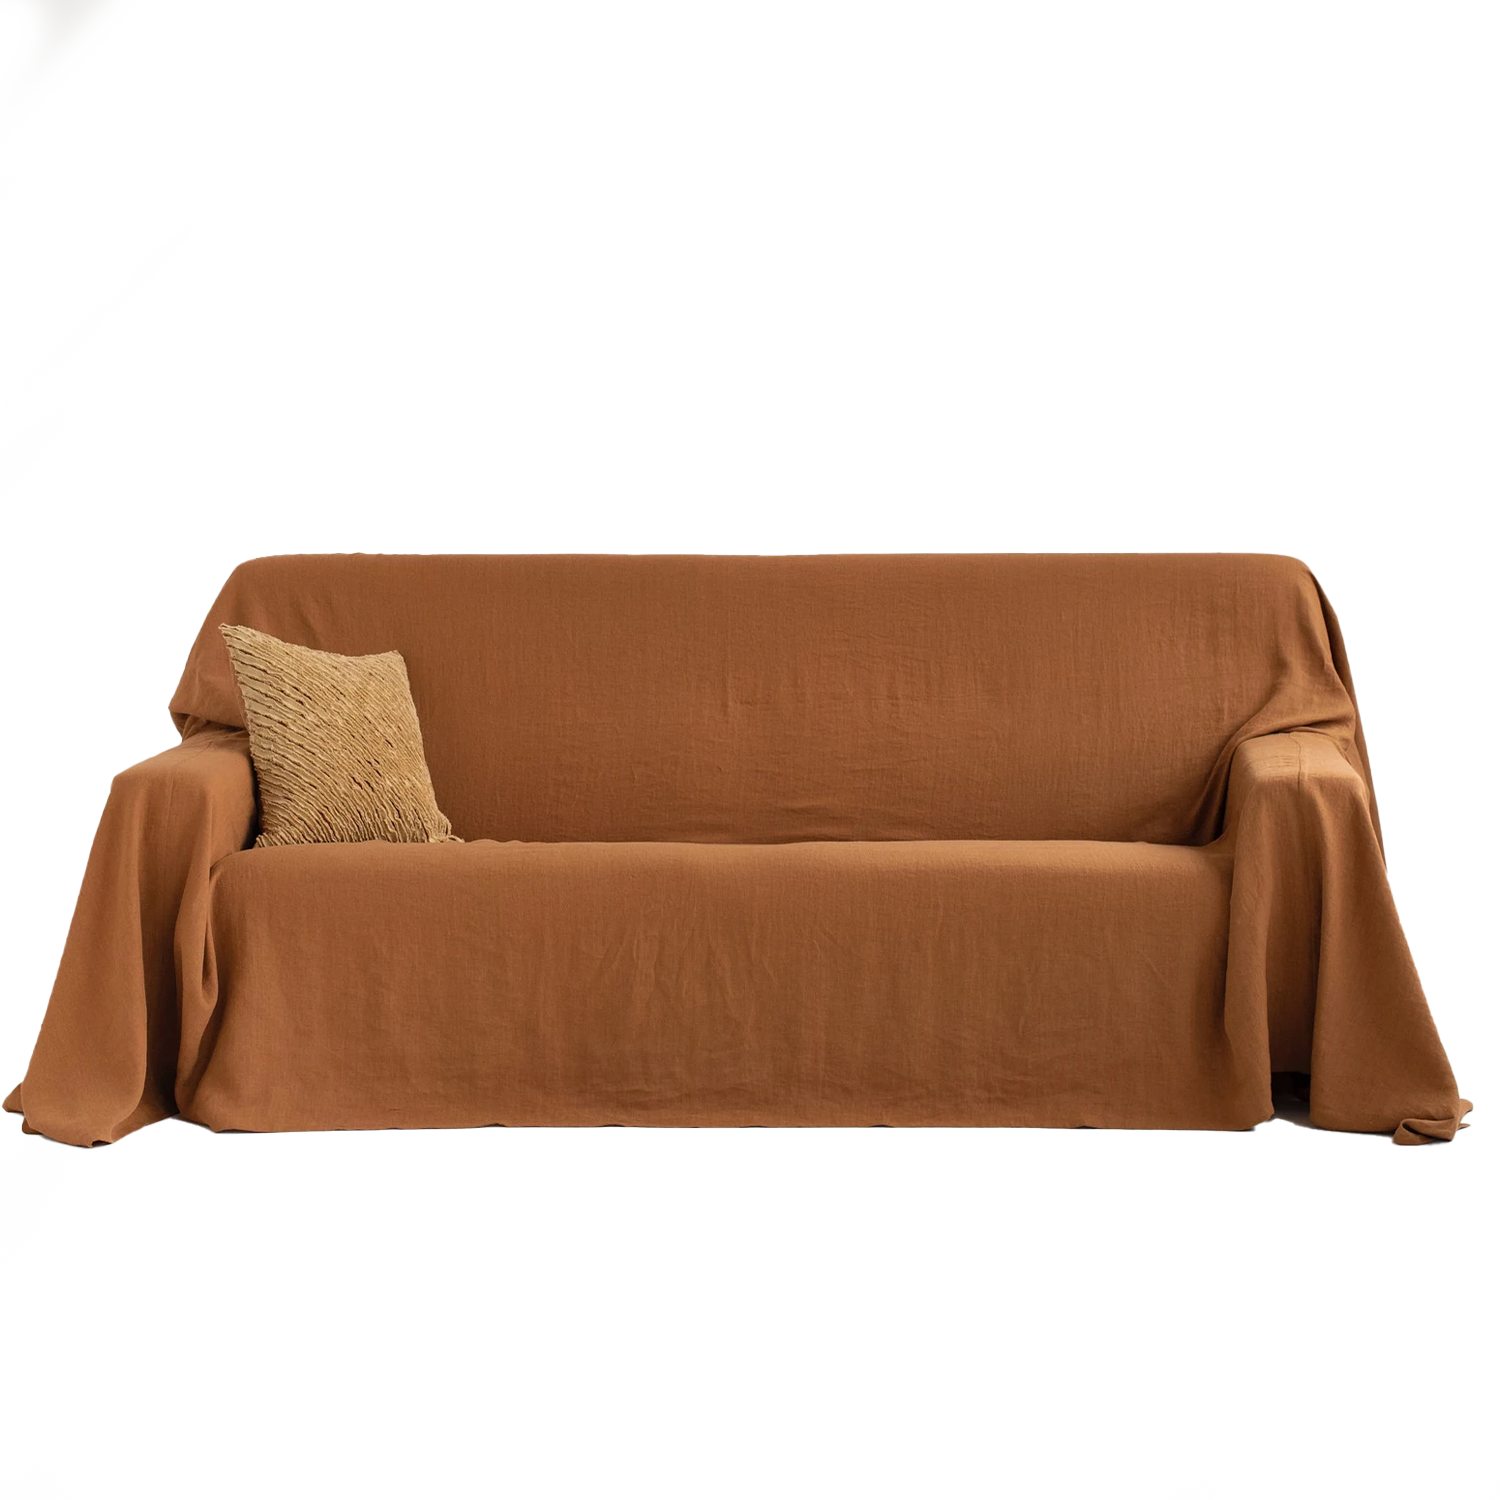 Rust Linen Couch Cover Draped Over Sofa with Pillow